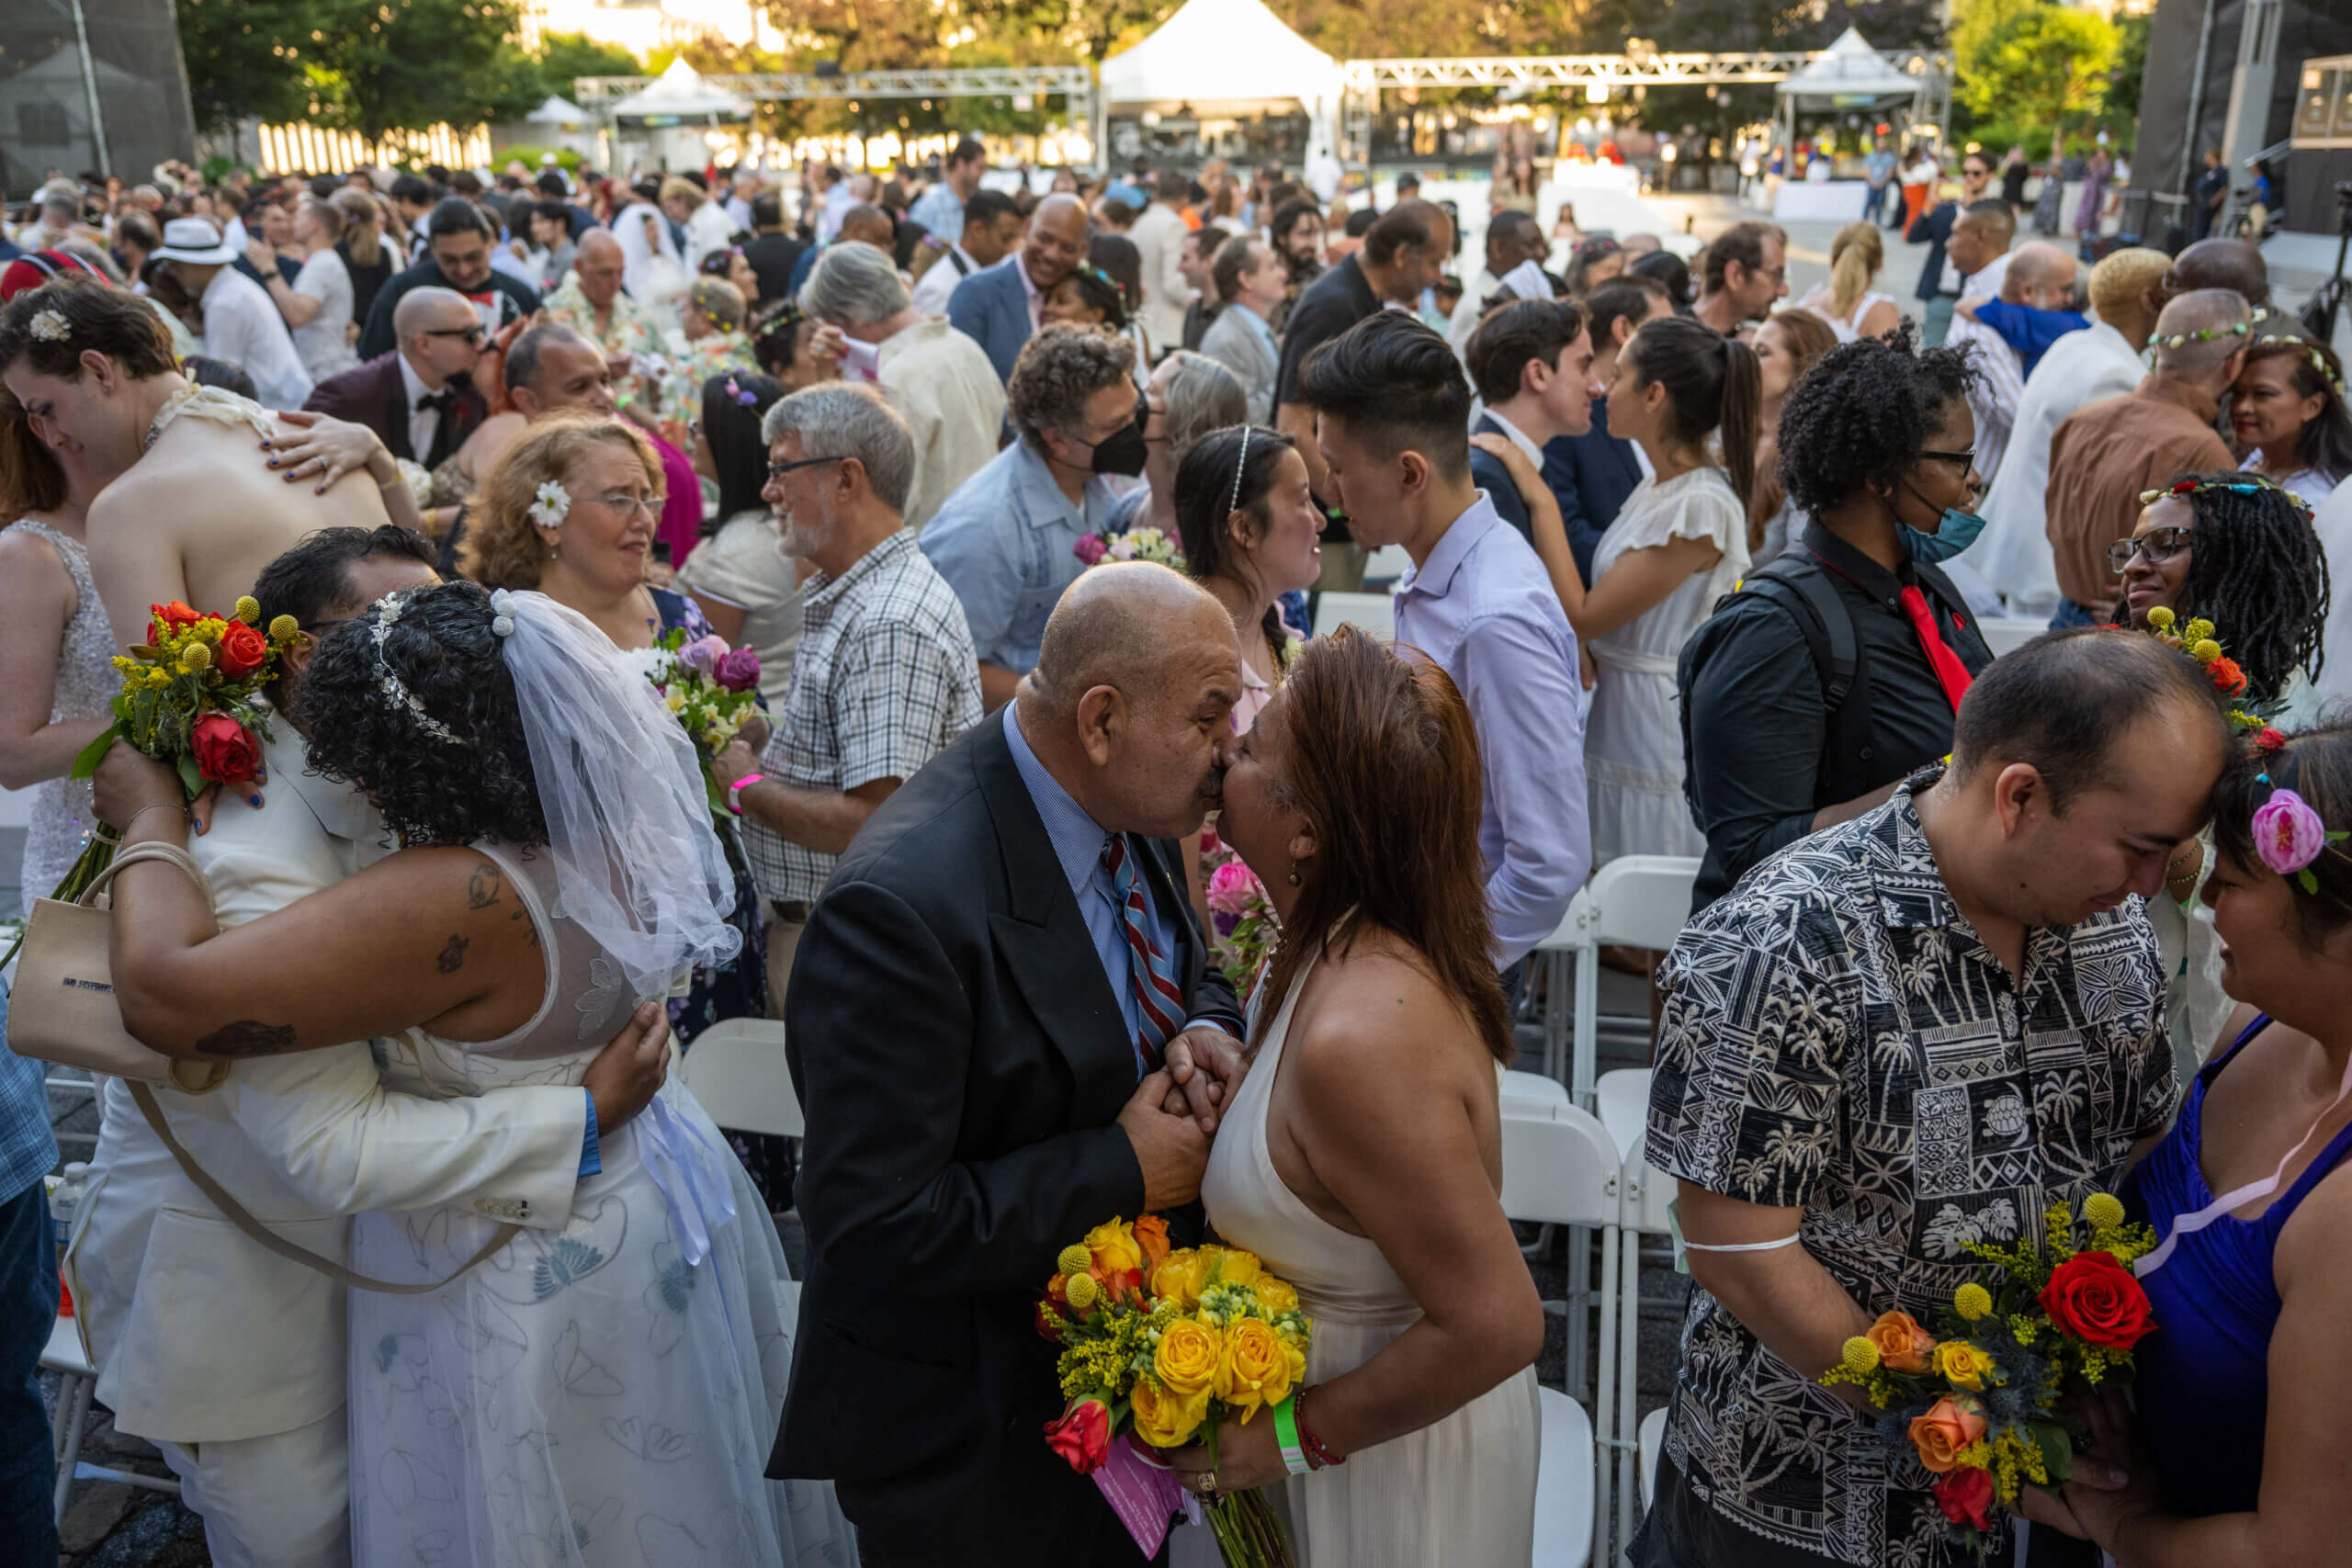 Couples seal their marriage with a kiss during the (Re)Wedding.